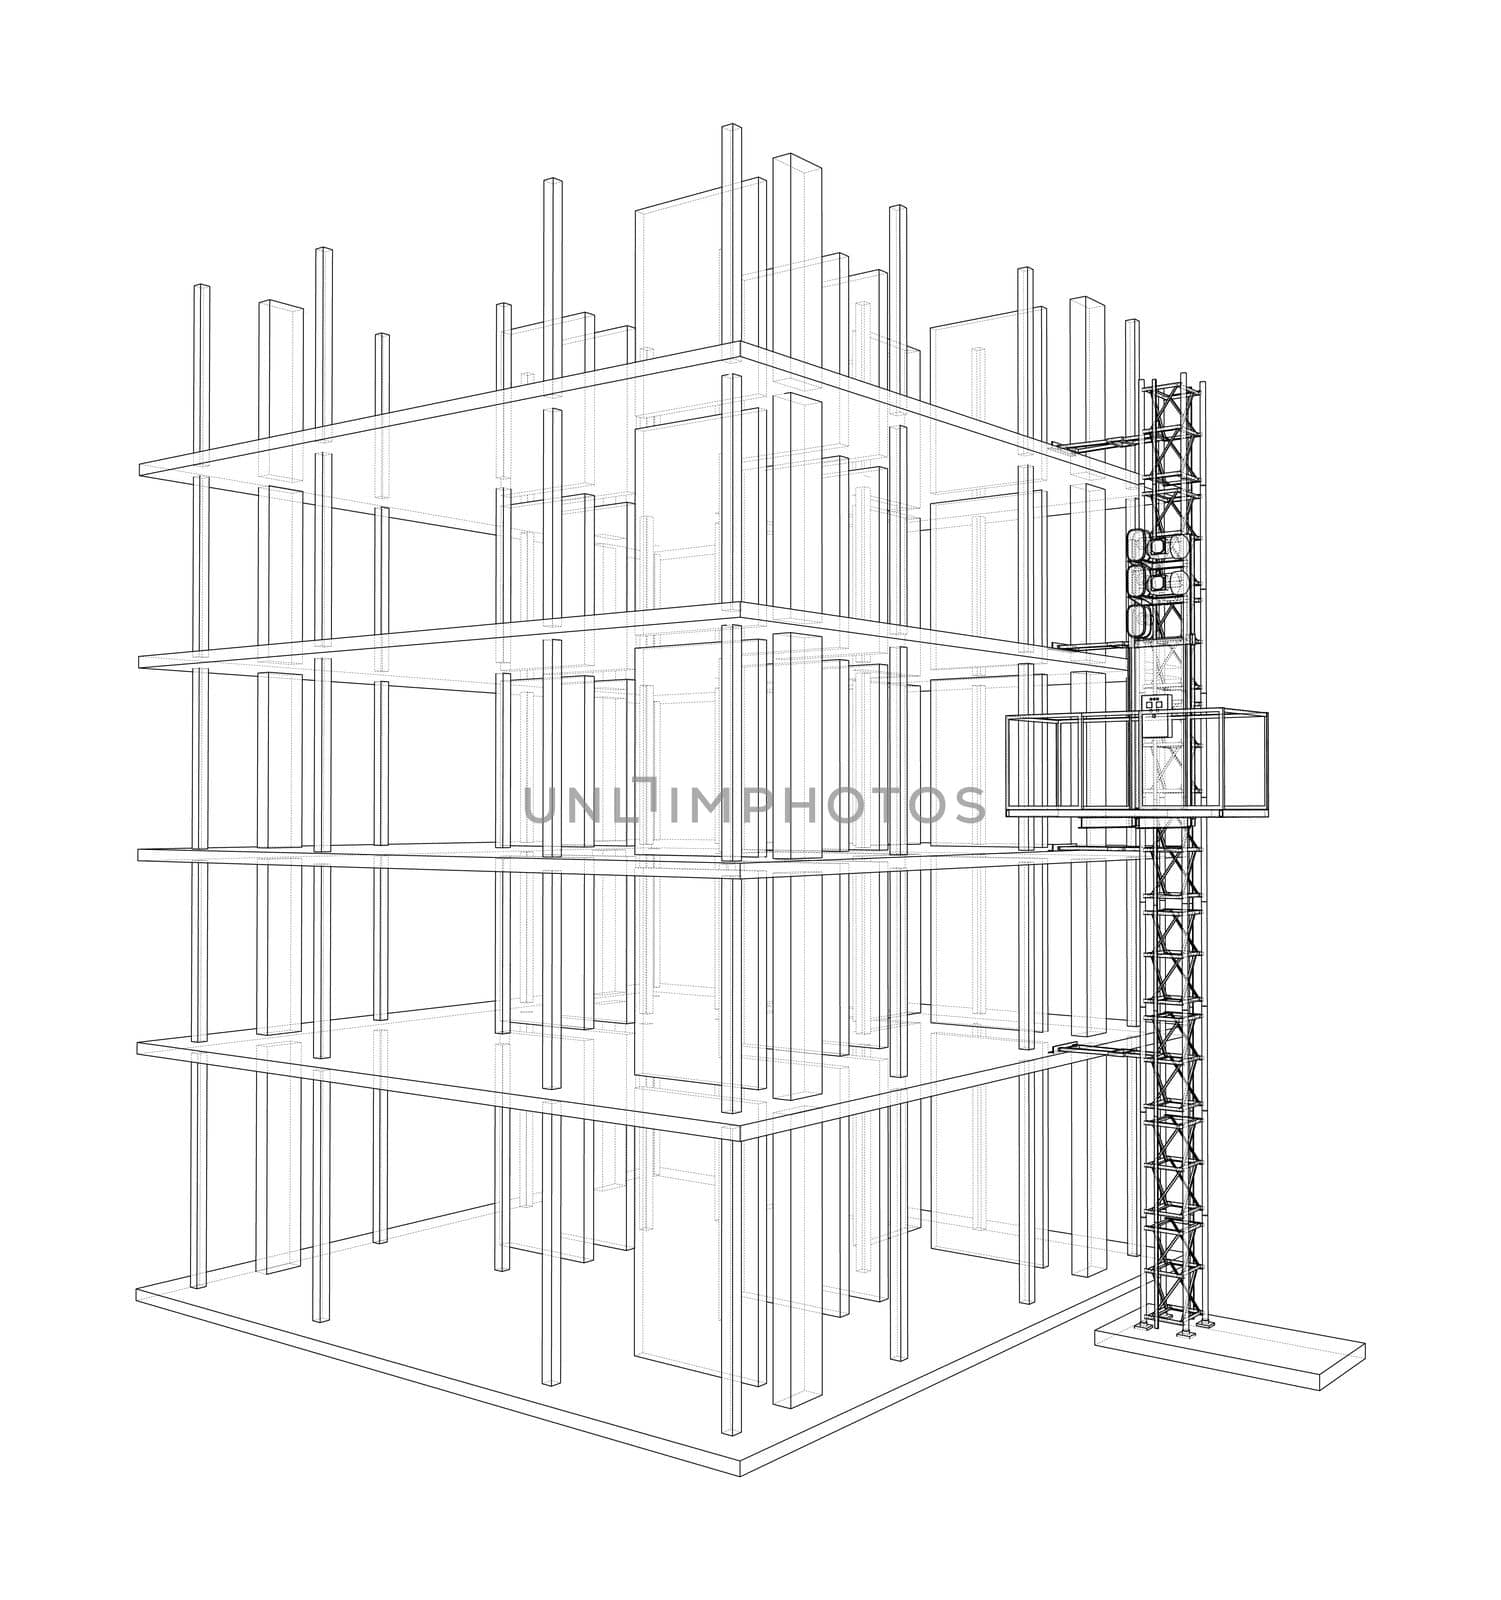 Building under construction with a mast lifts outline. 3d illustration